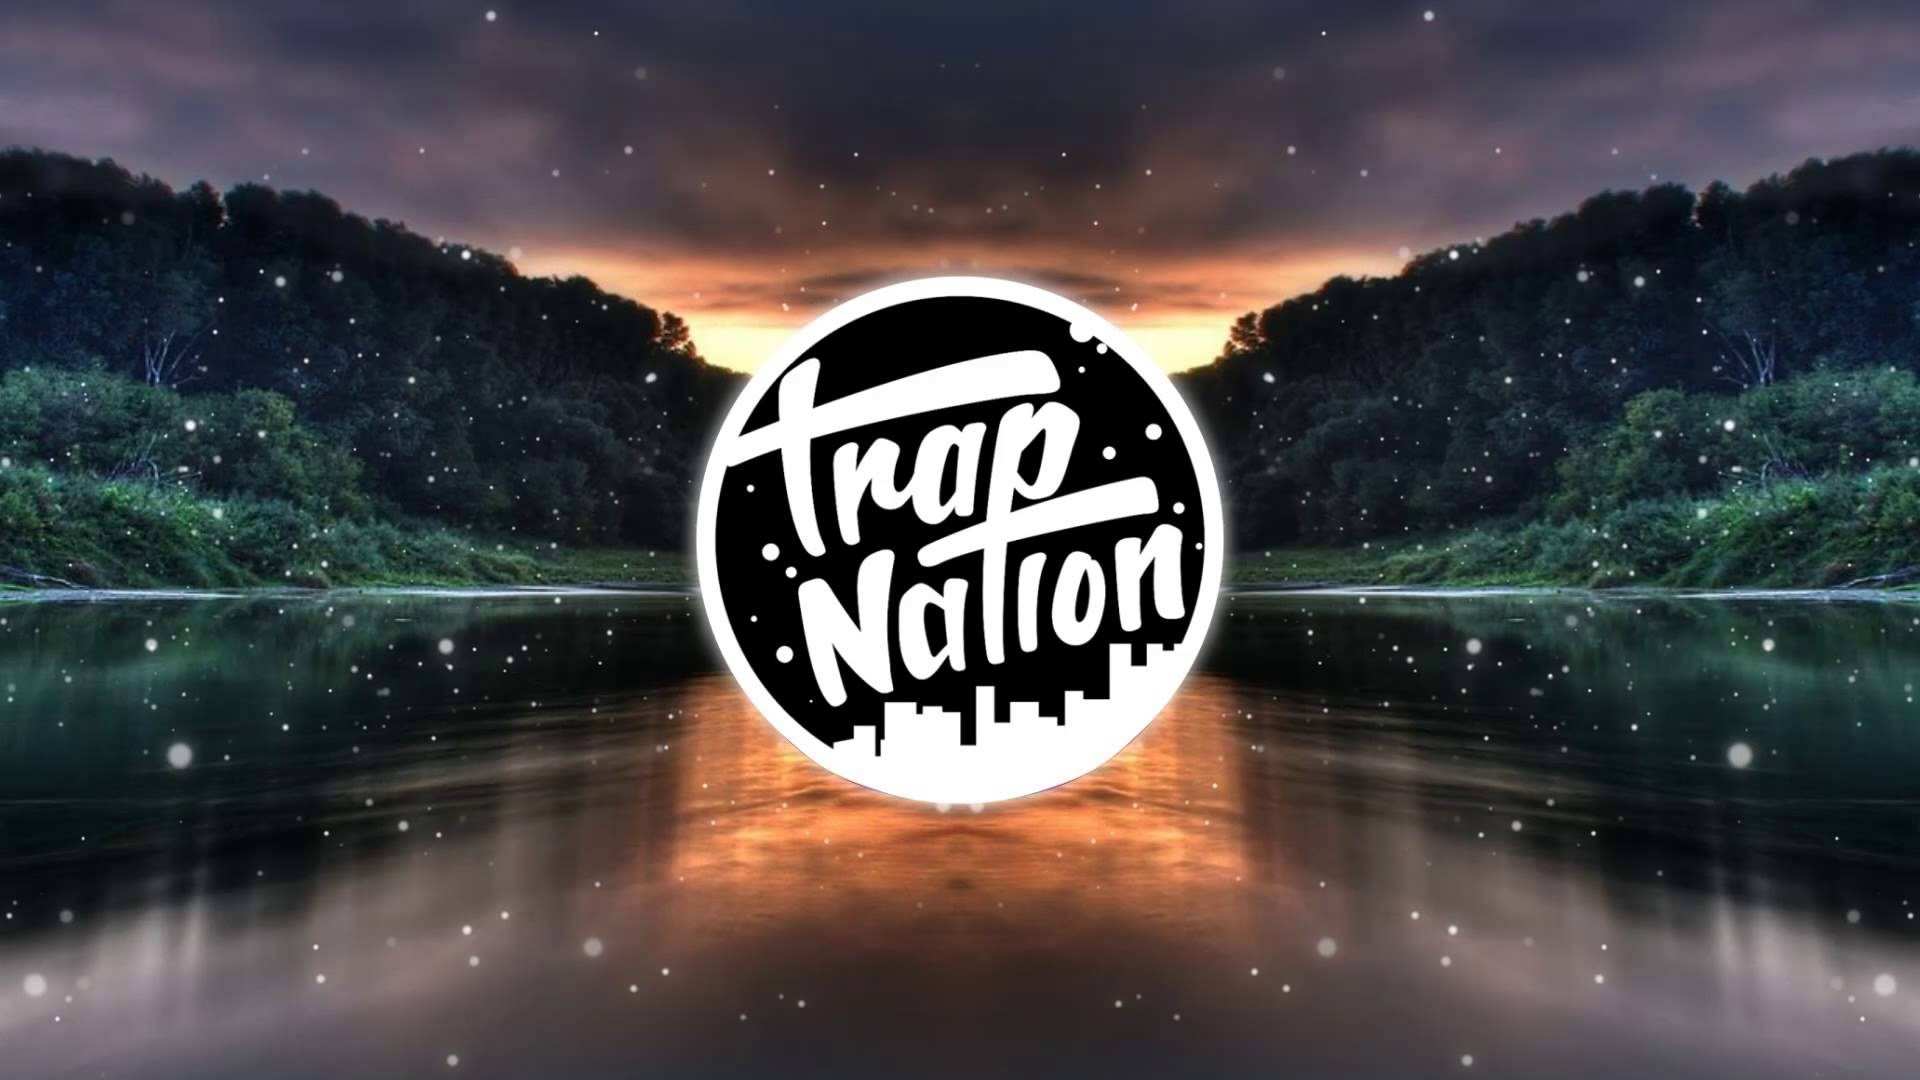 Katie Sky Monsters K Theory Remix - Trap Nation Capa (#477399) - HD ...